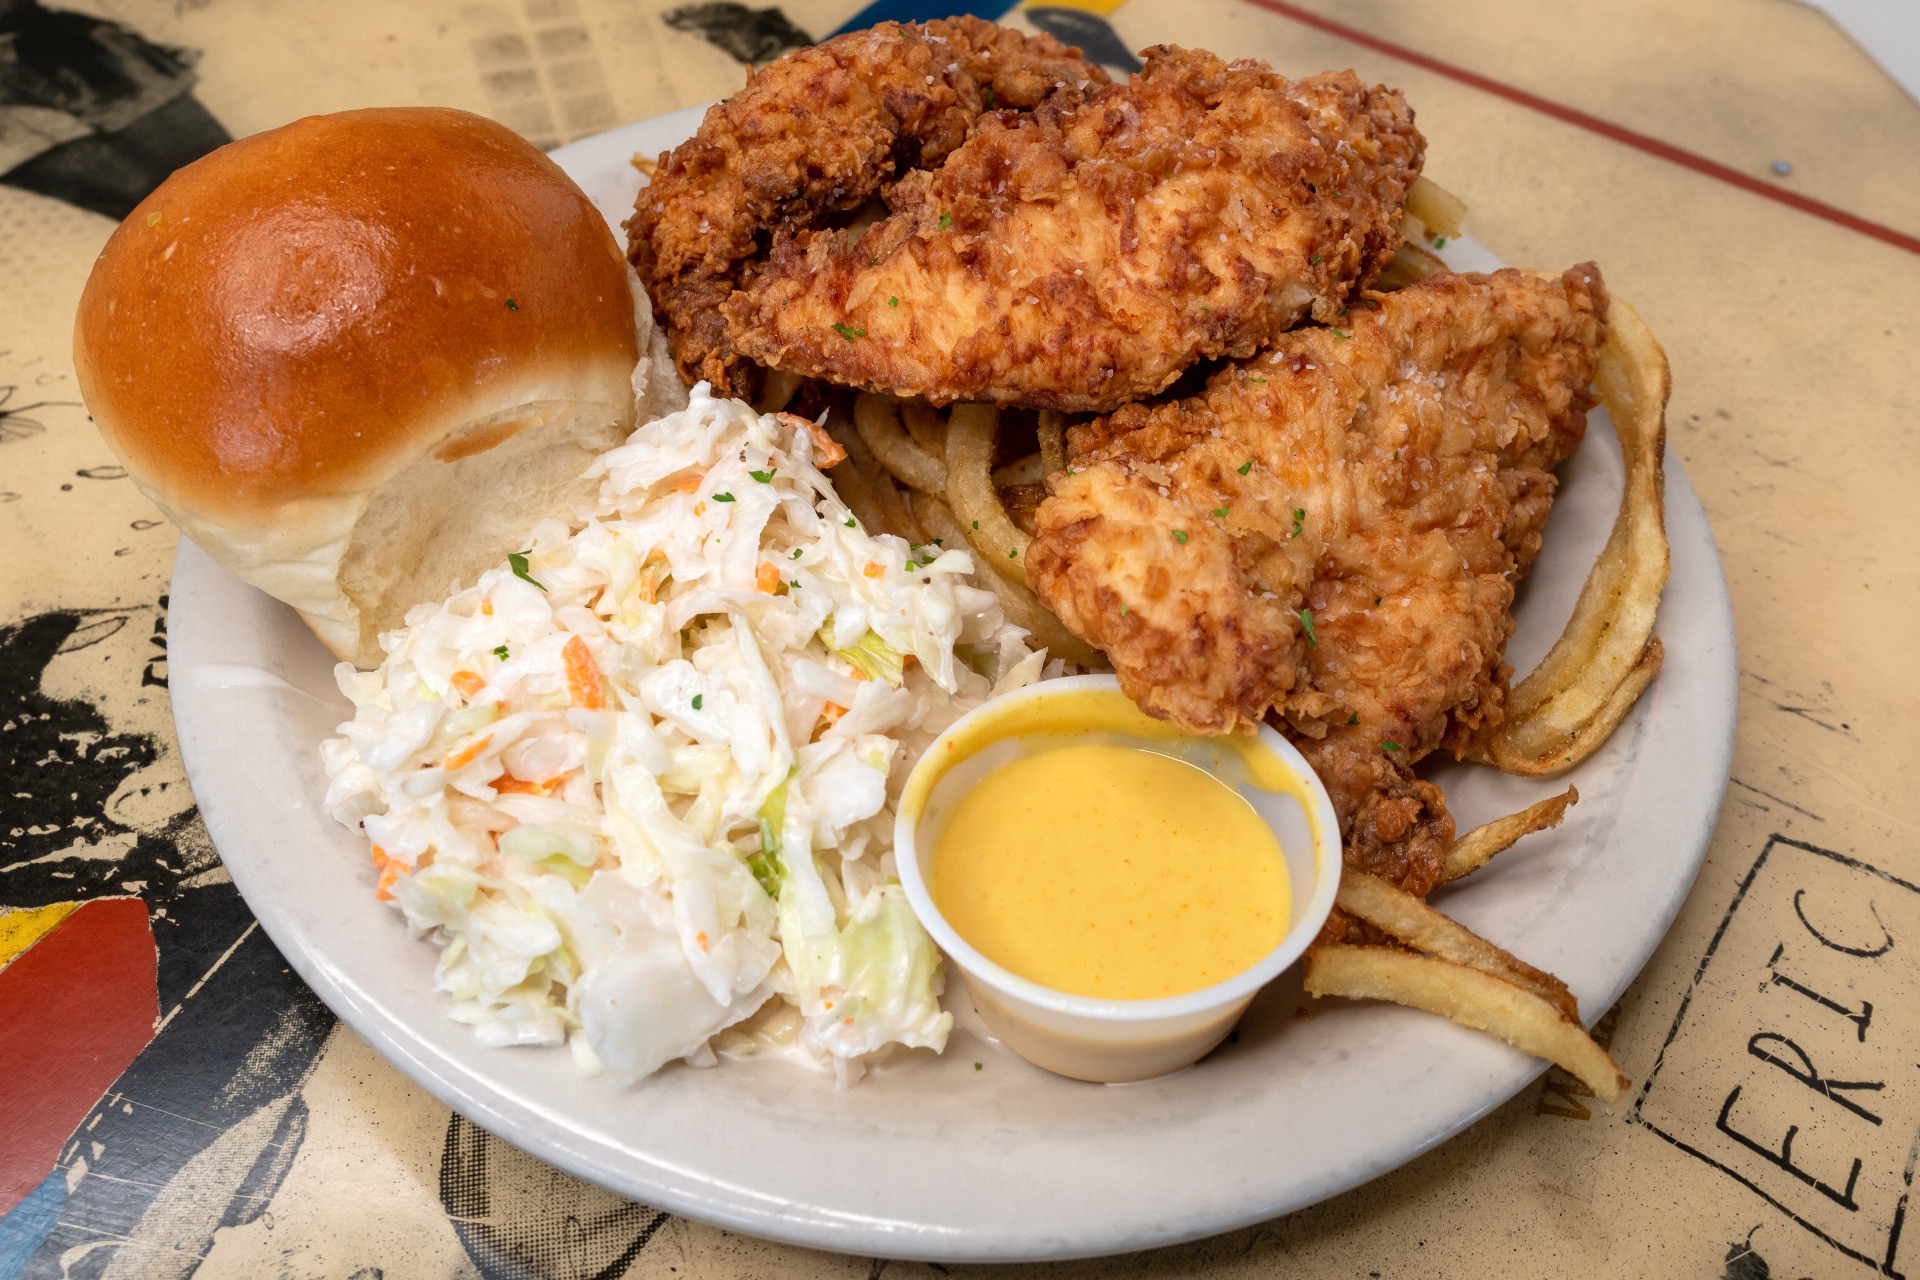 A plate lunch with chicken tenders, coleslaw and a roll